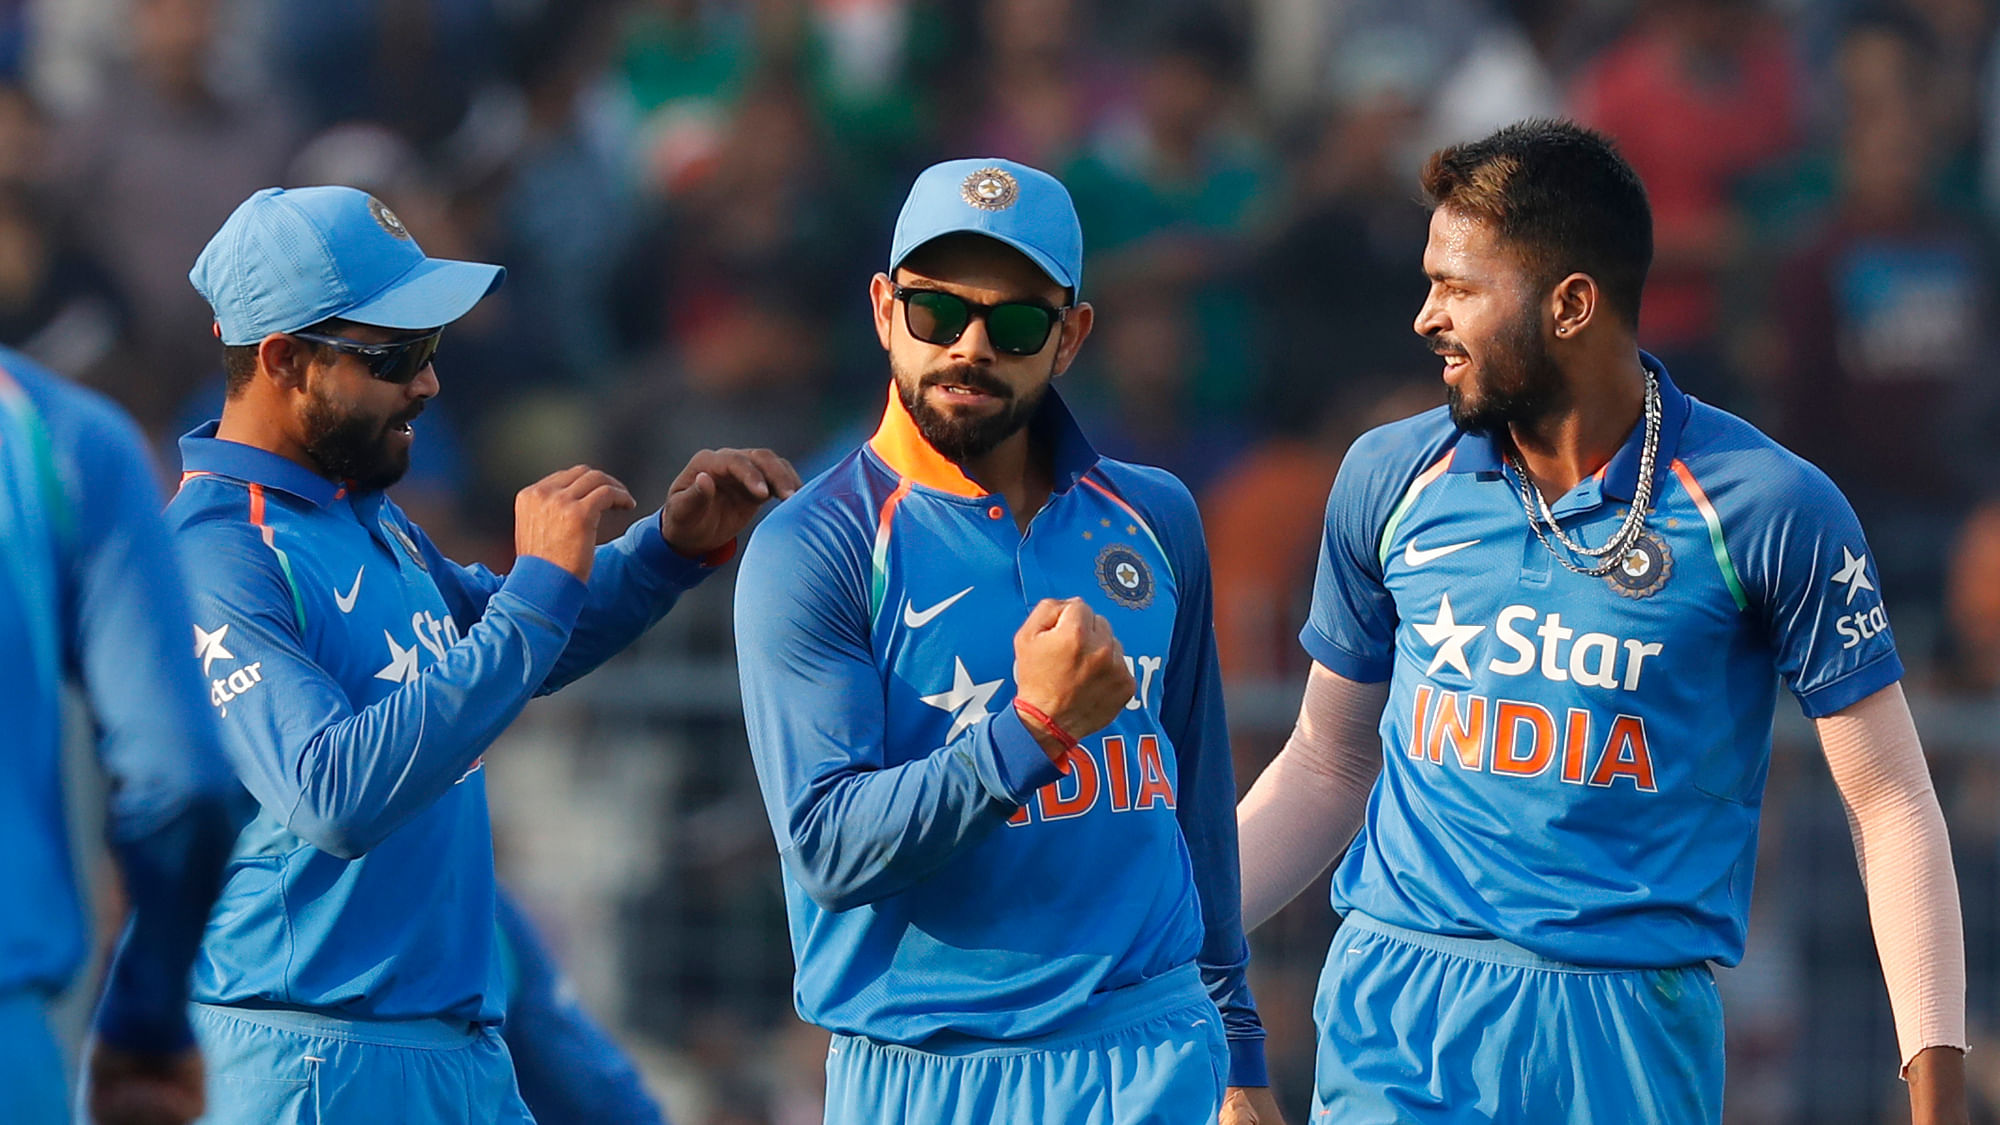 Virat Kohli will lead India as they take on Australia in the upcoming 5-match ODI series.